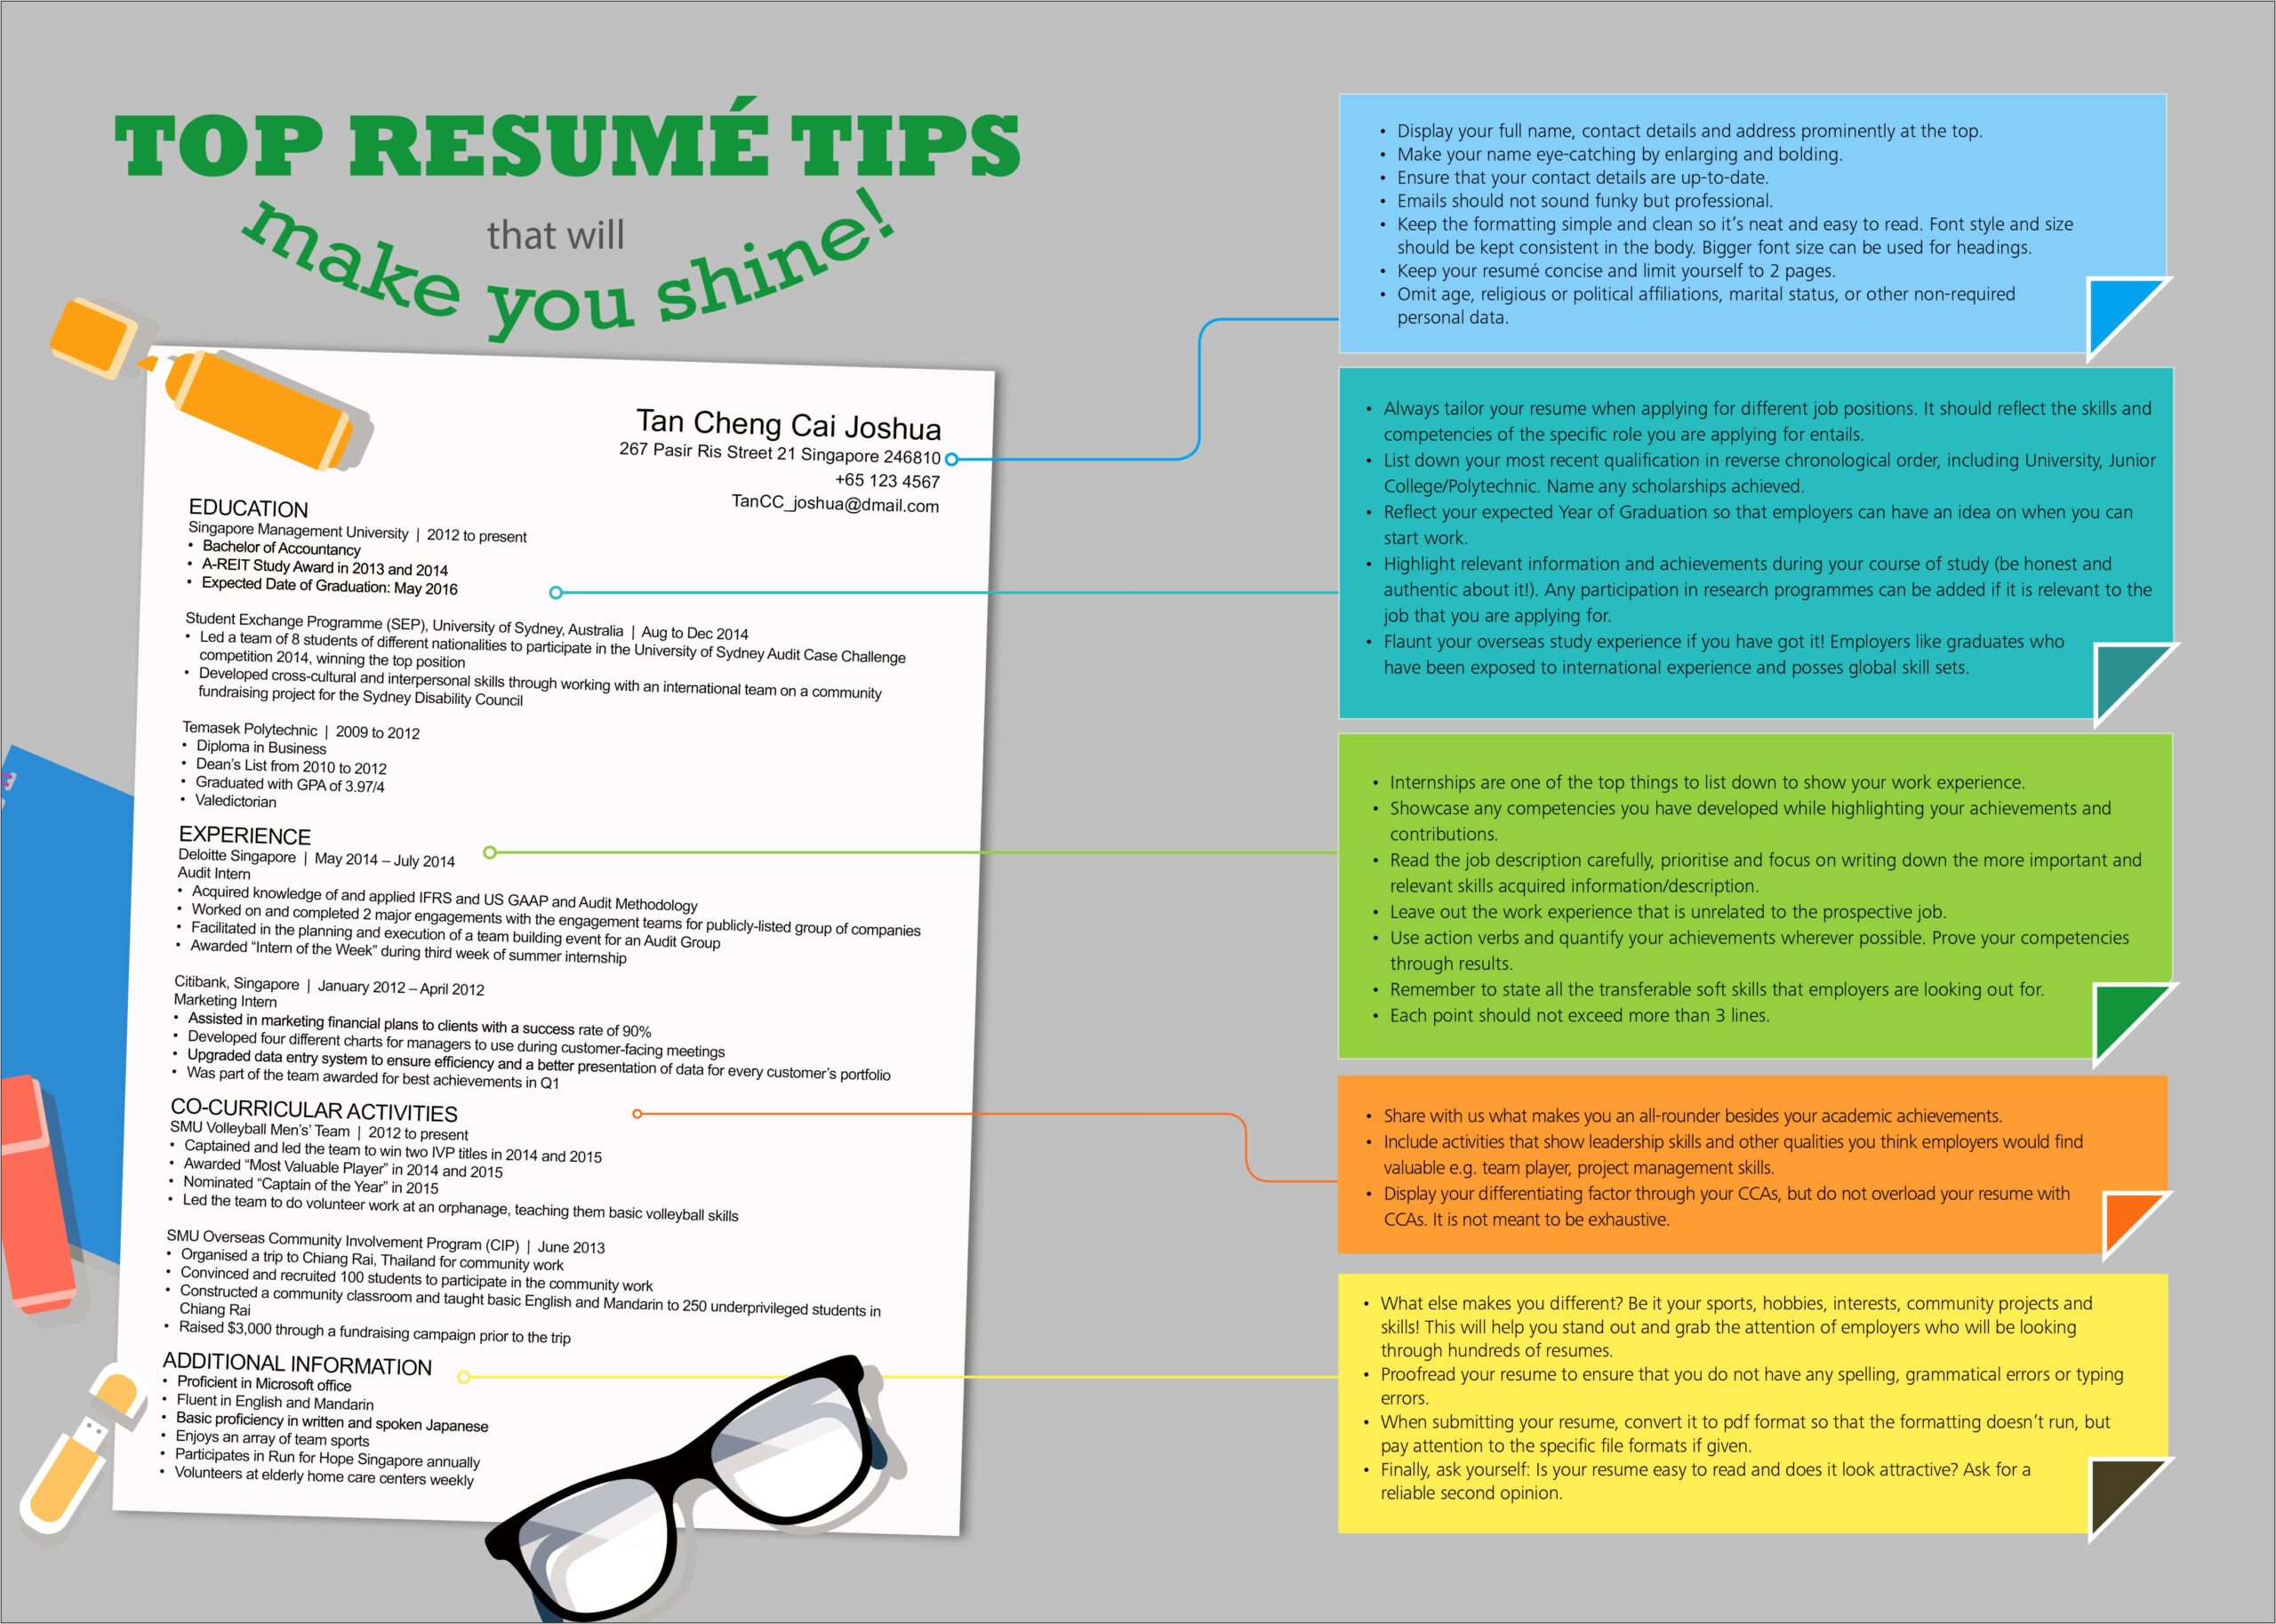 Sample Resume For Internship In Accounting In Malaysia